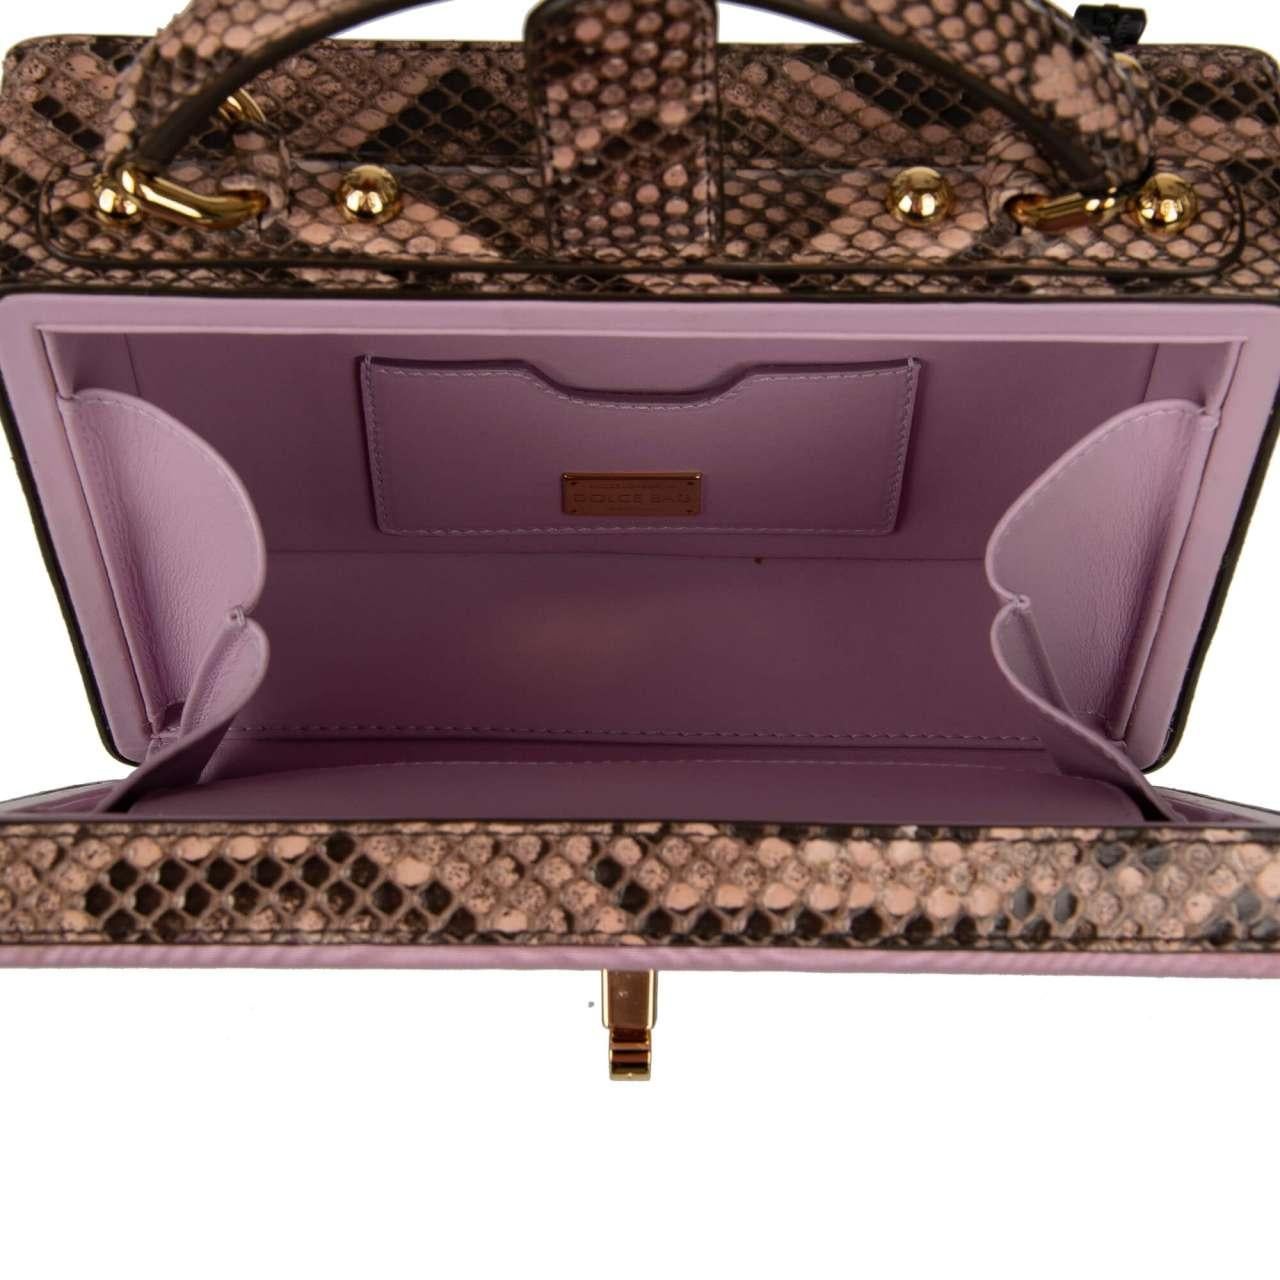 Dolce & Gabbana - Unique Snakeskin and Moire Clutch Bag DOLCE BOX Pink For Sale 3